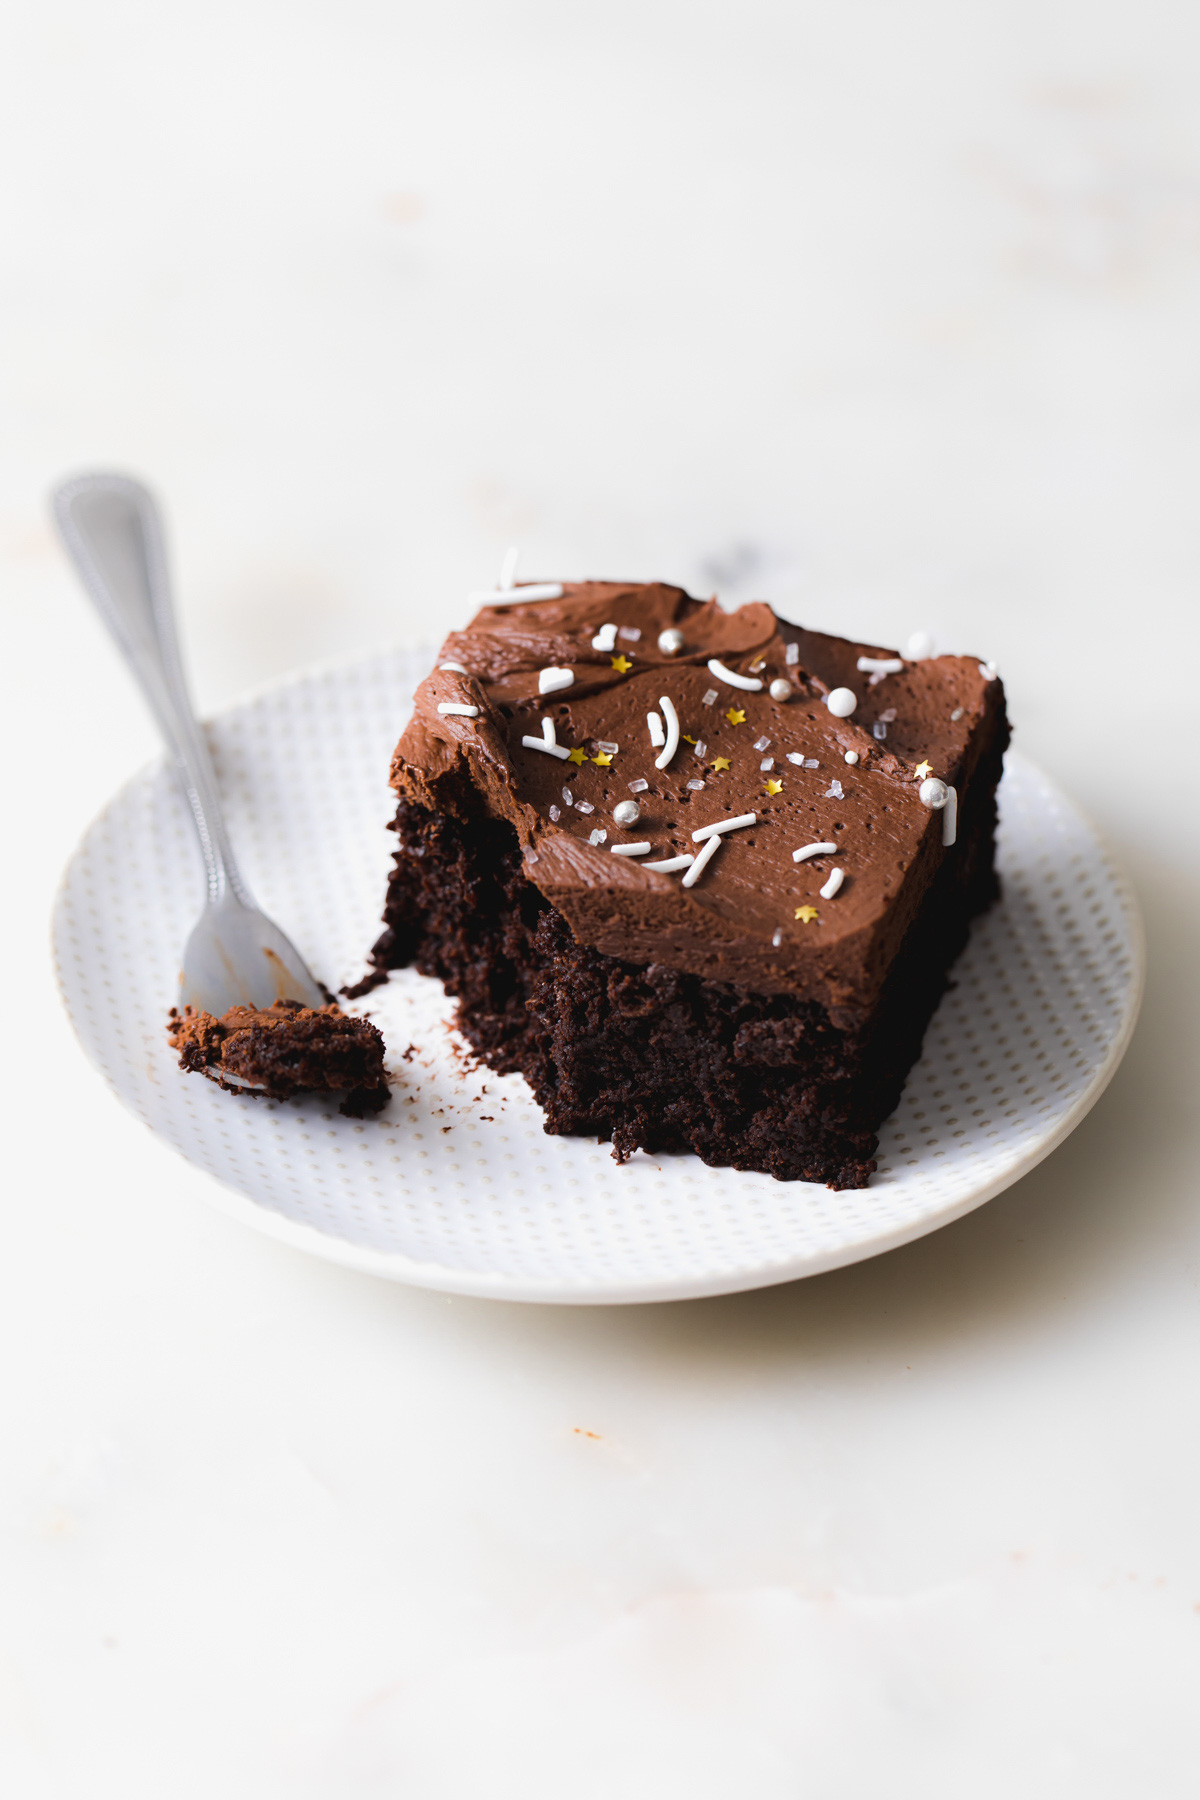 A slice of chocolate snack cake on a plate with whipped ganache frosting